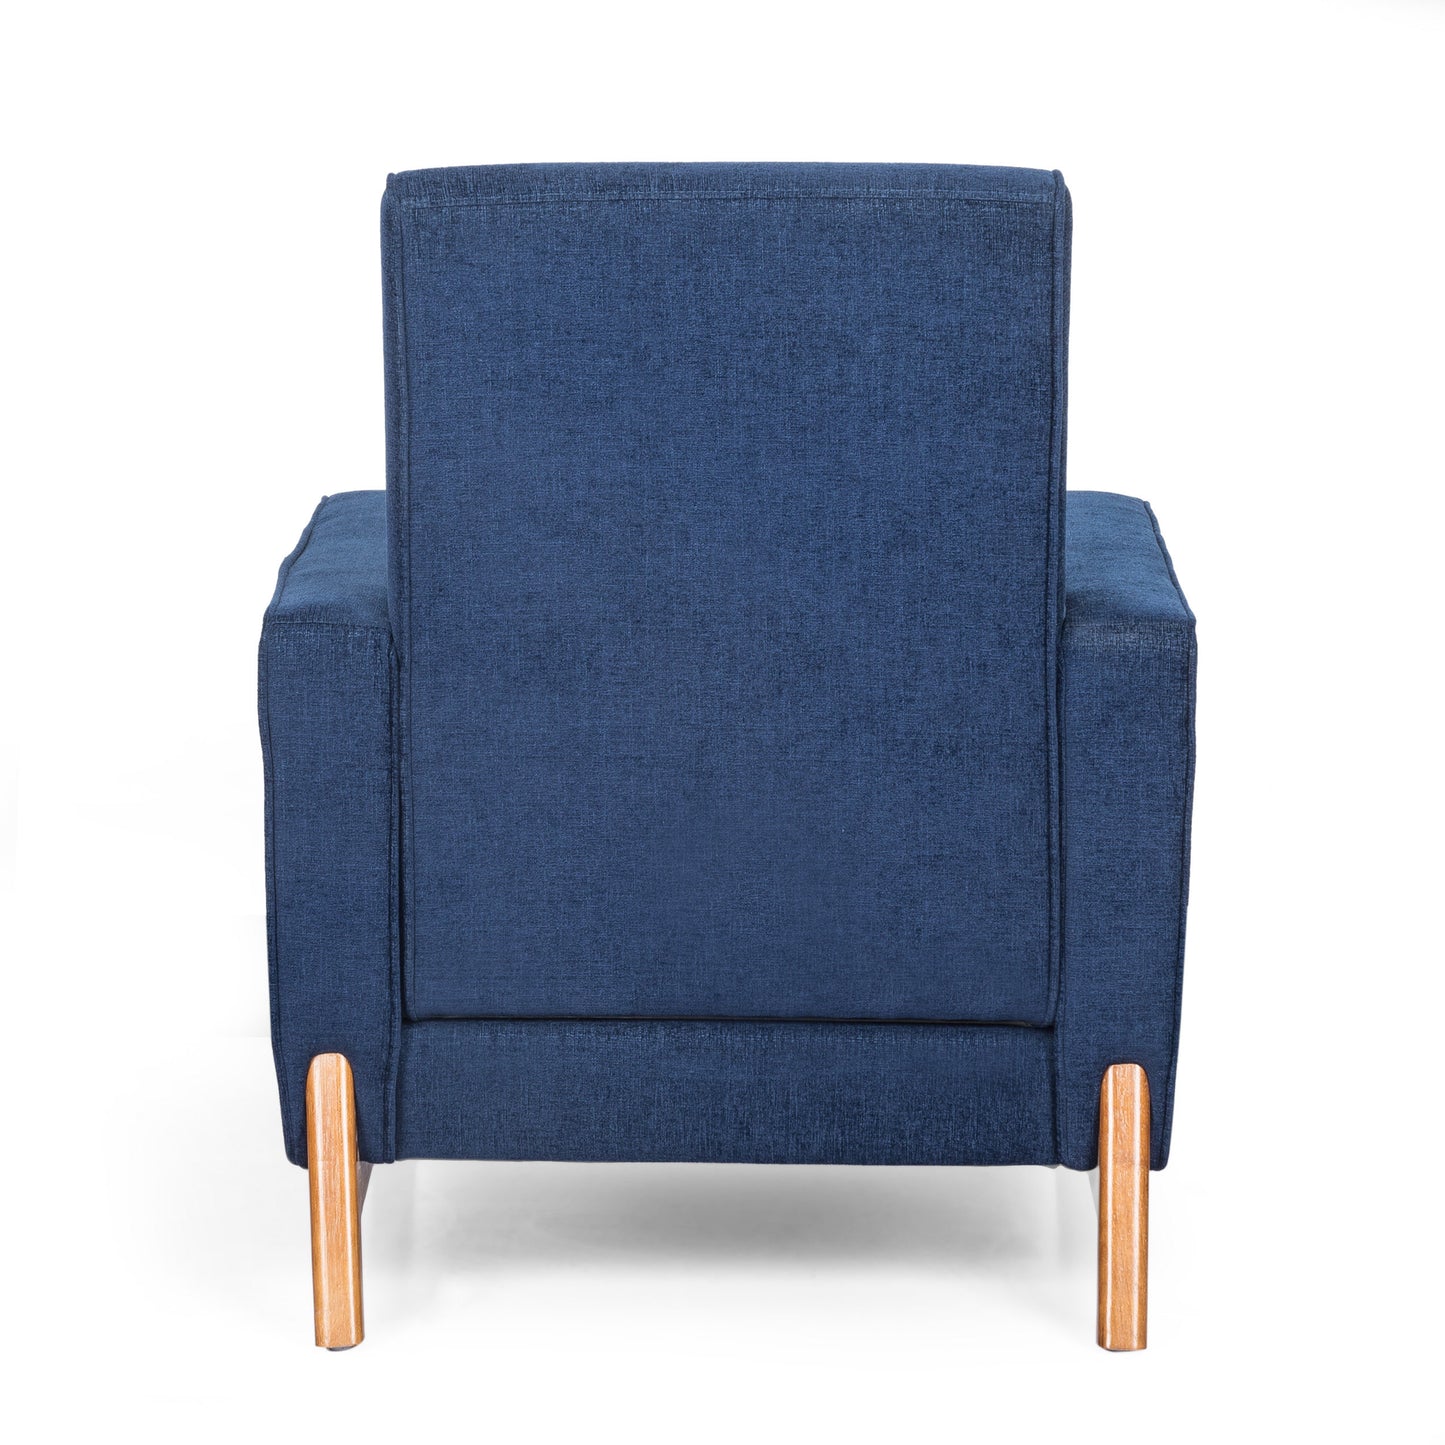 Haston Contemporary Upholstered Club Chair